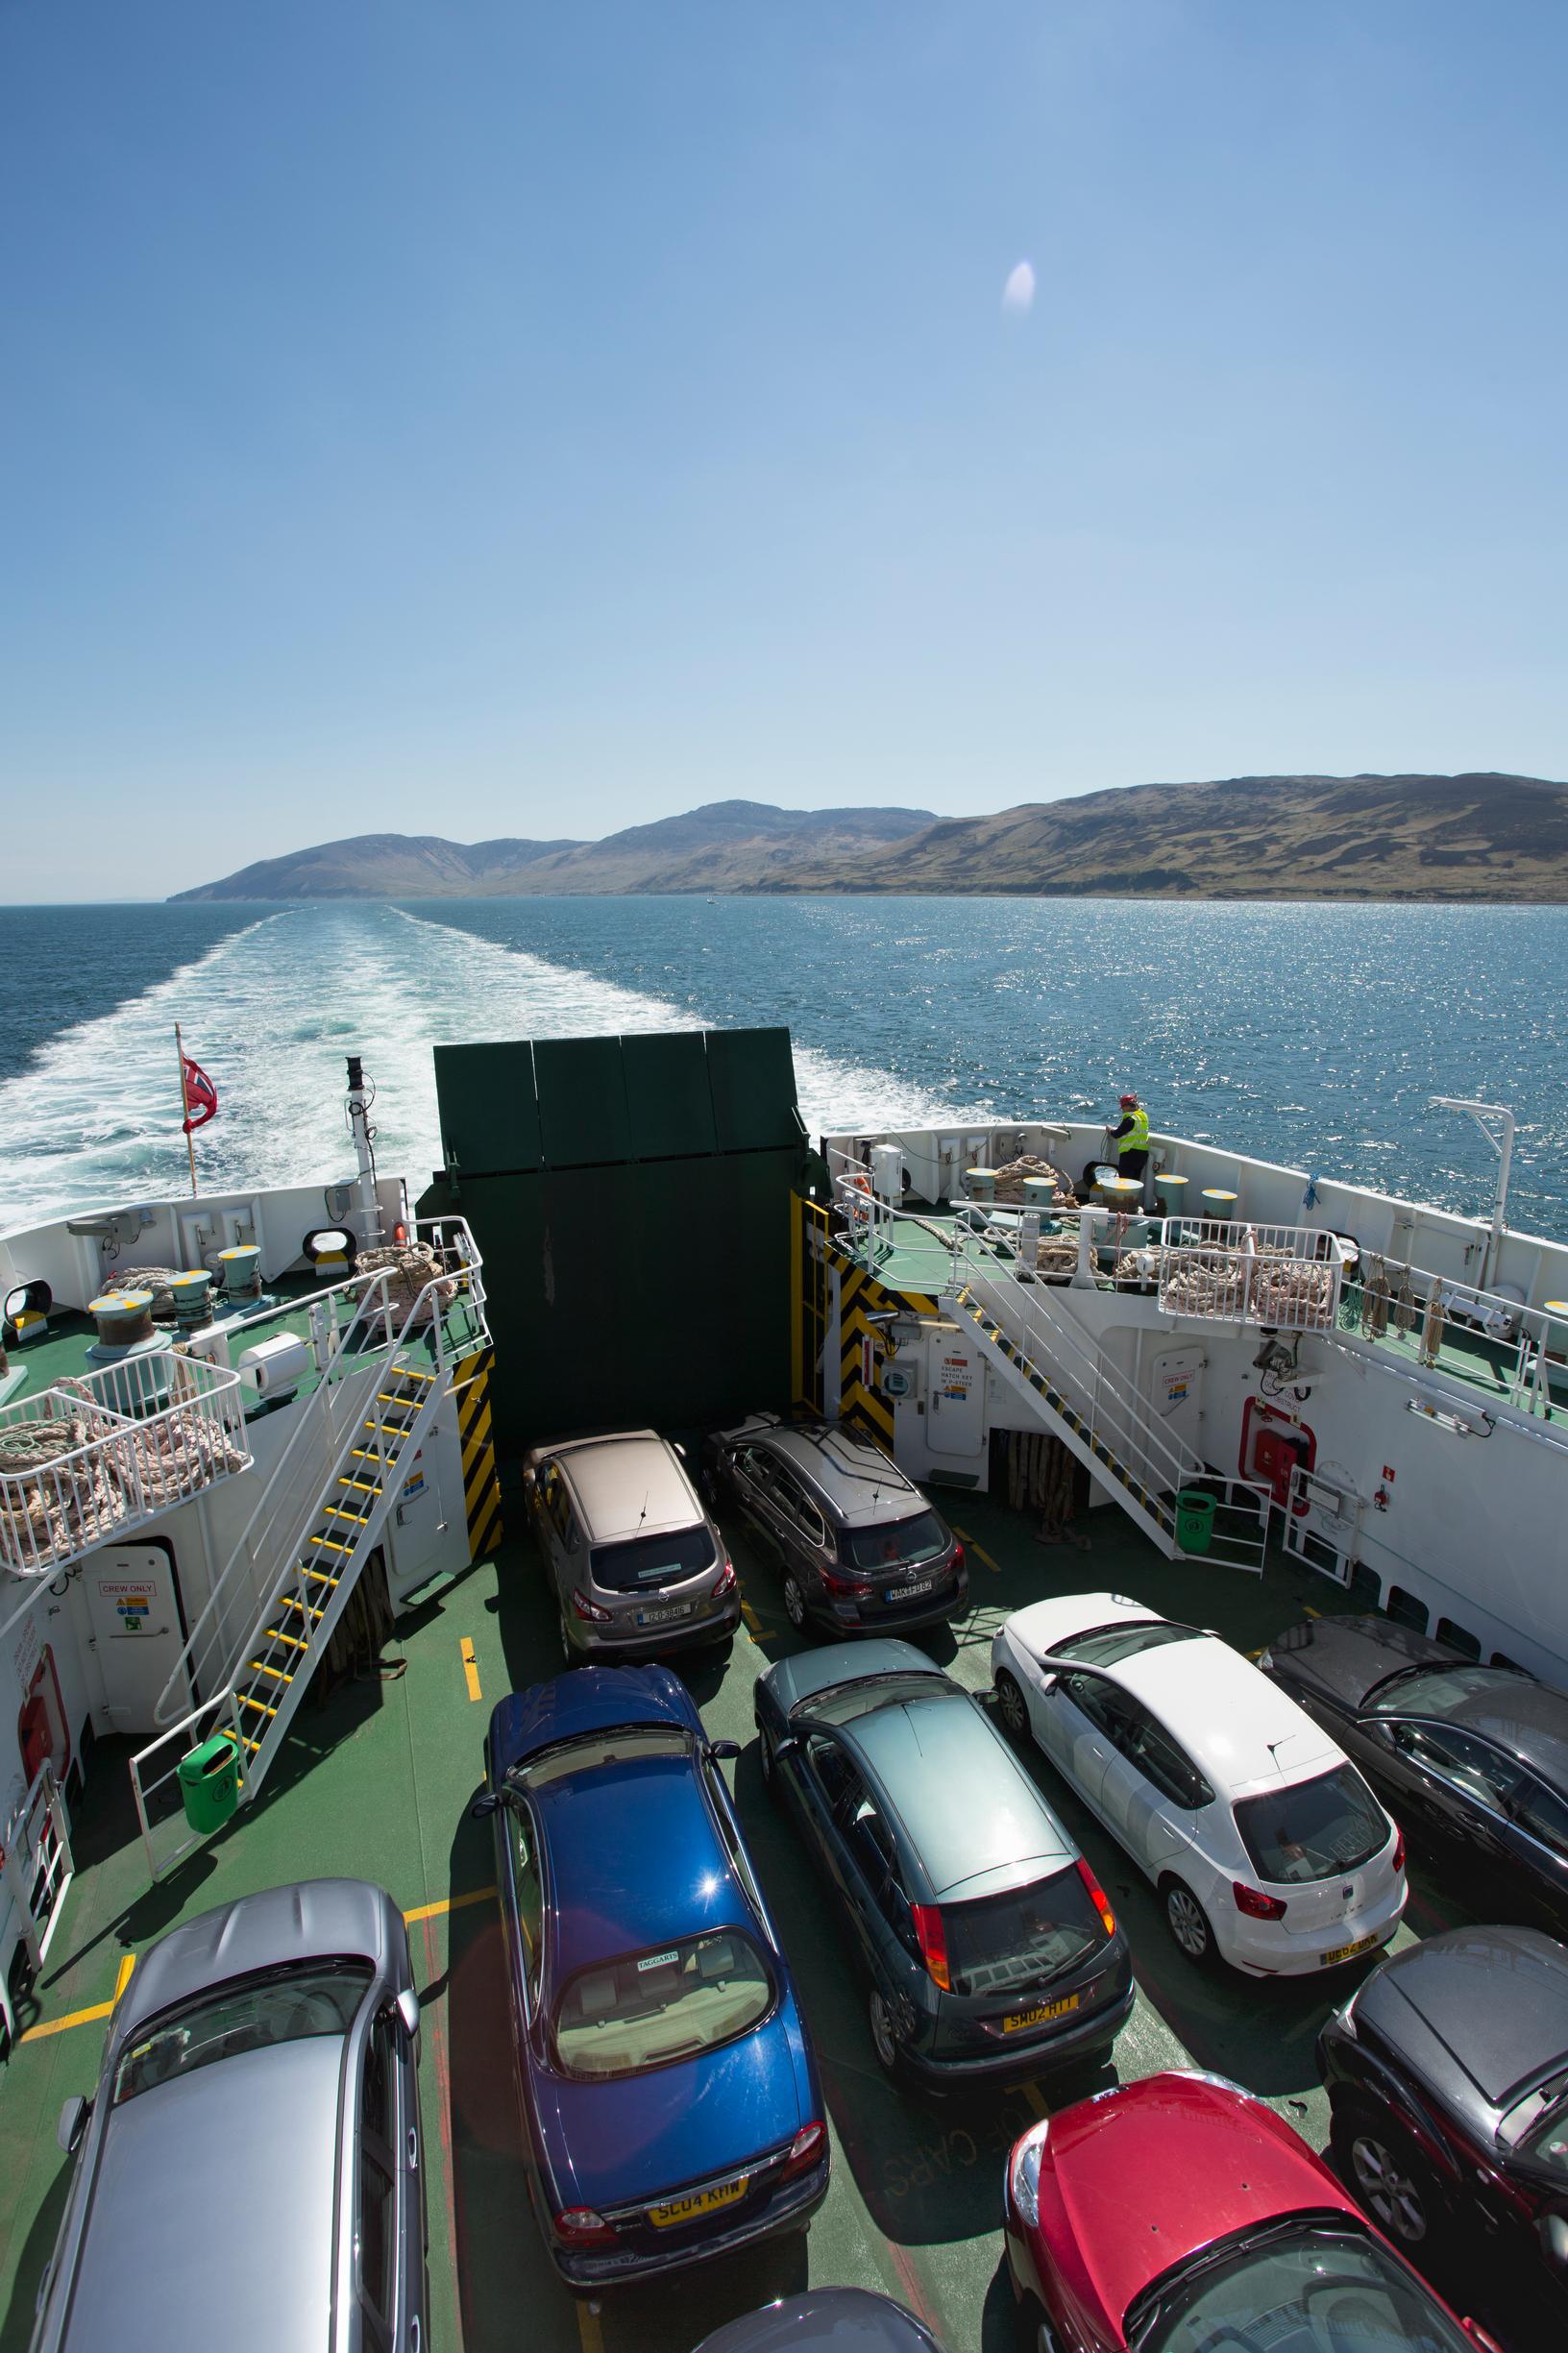 Staycation traffic has put pressure on ferry services in Scotland